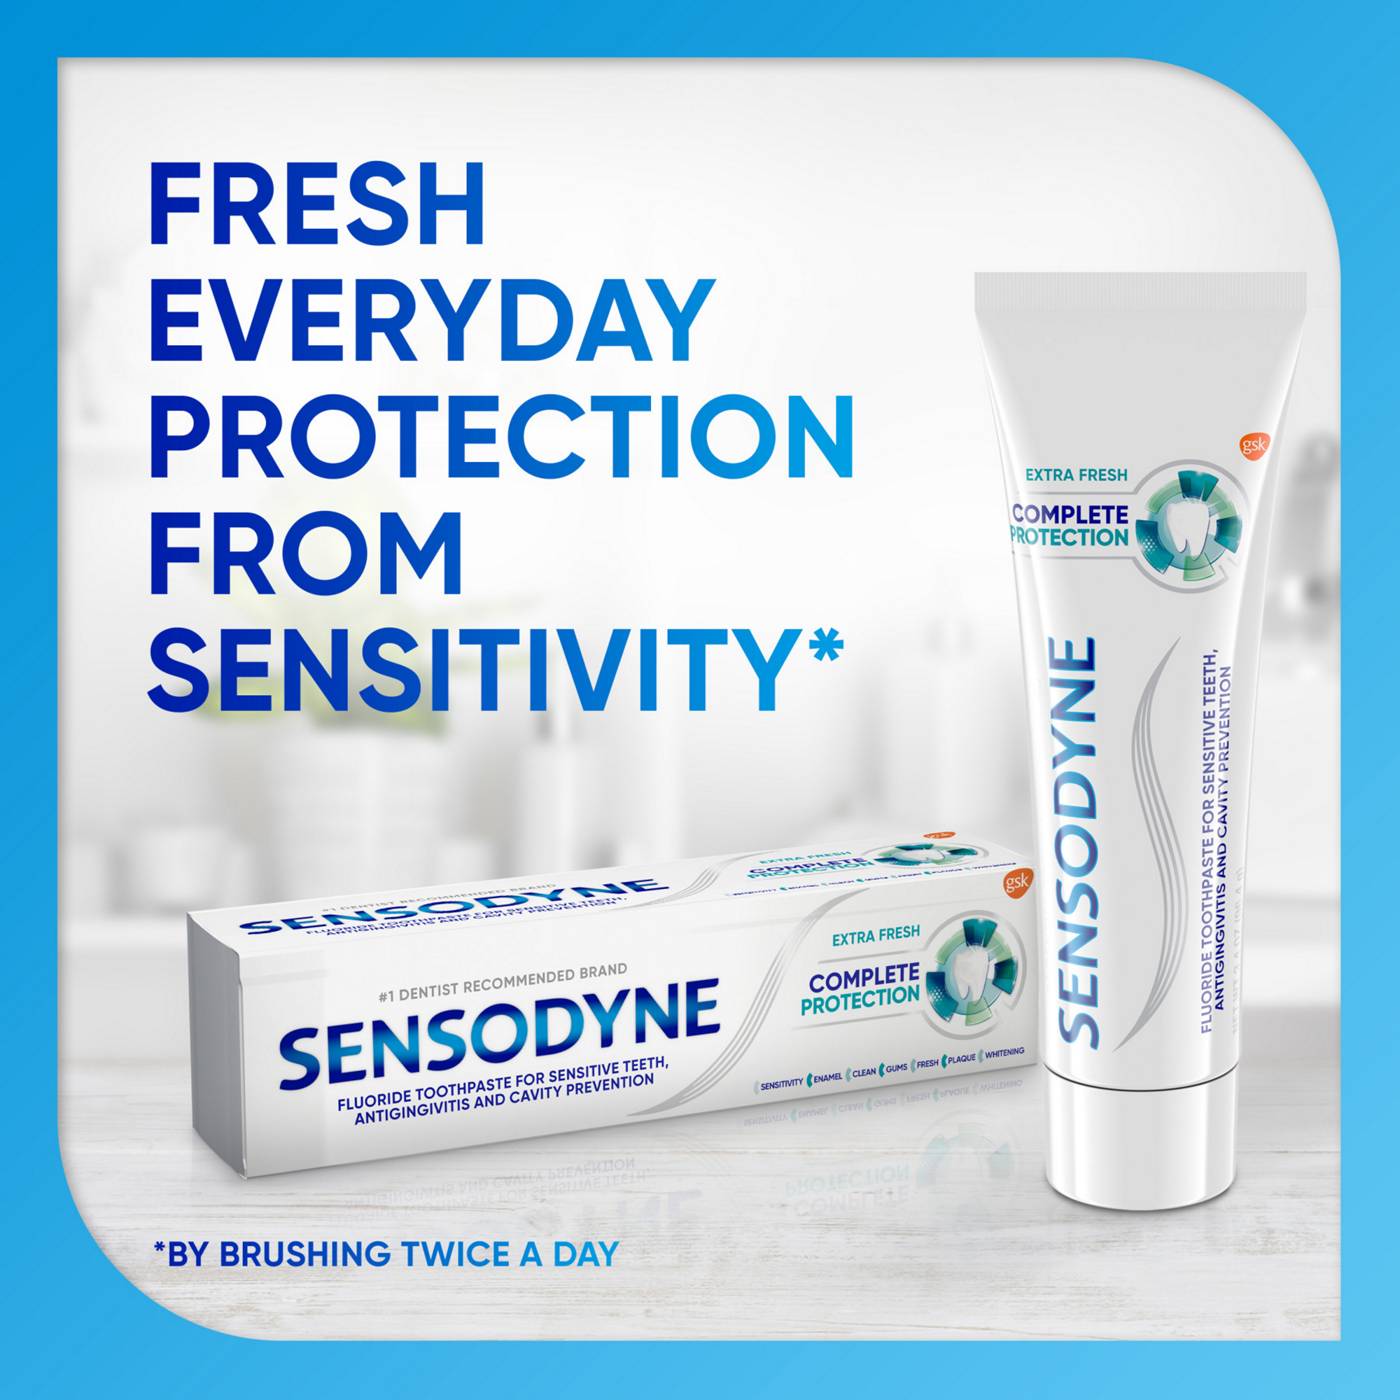 Sensodyne Complete Protection Toothpaste - Extra Fresh; image 2 of 8